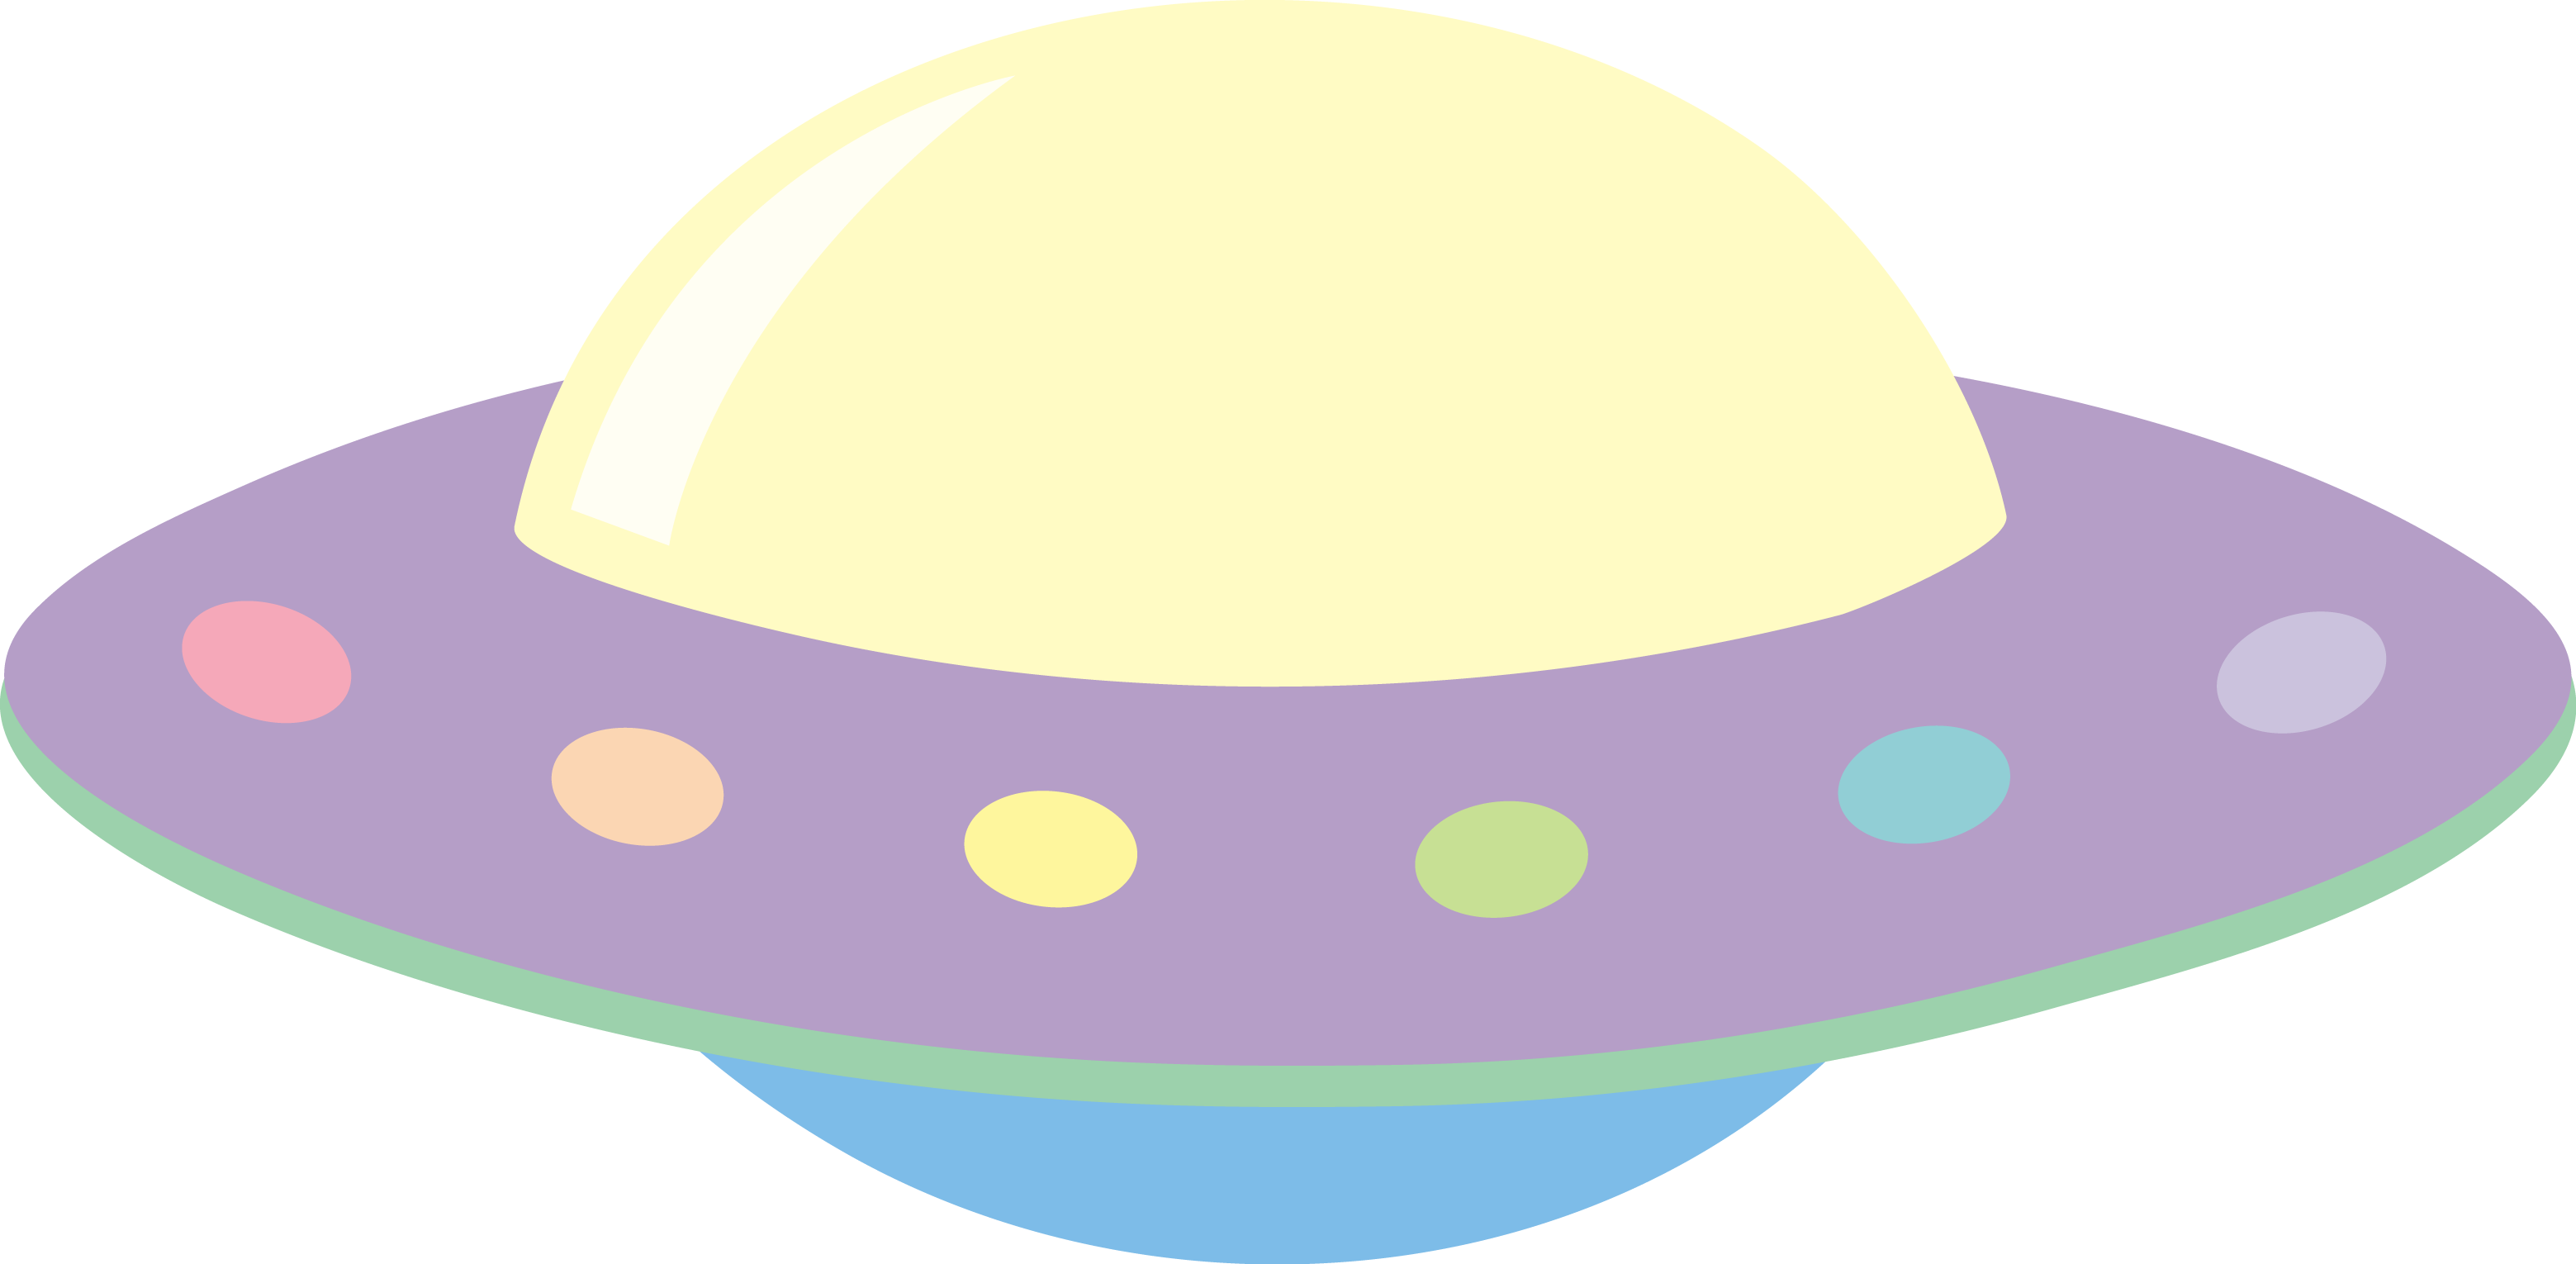 Ufo and alien clipart